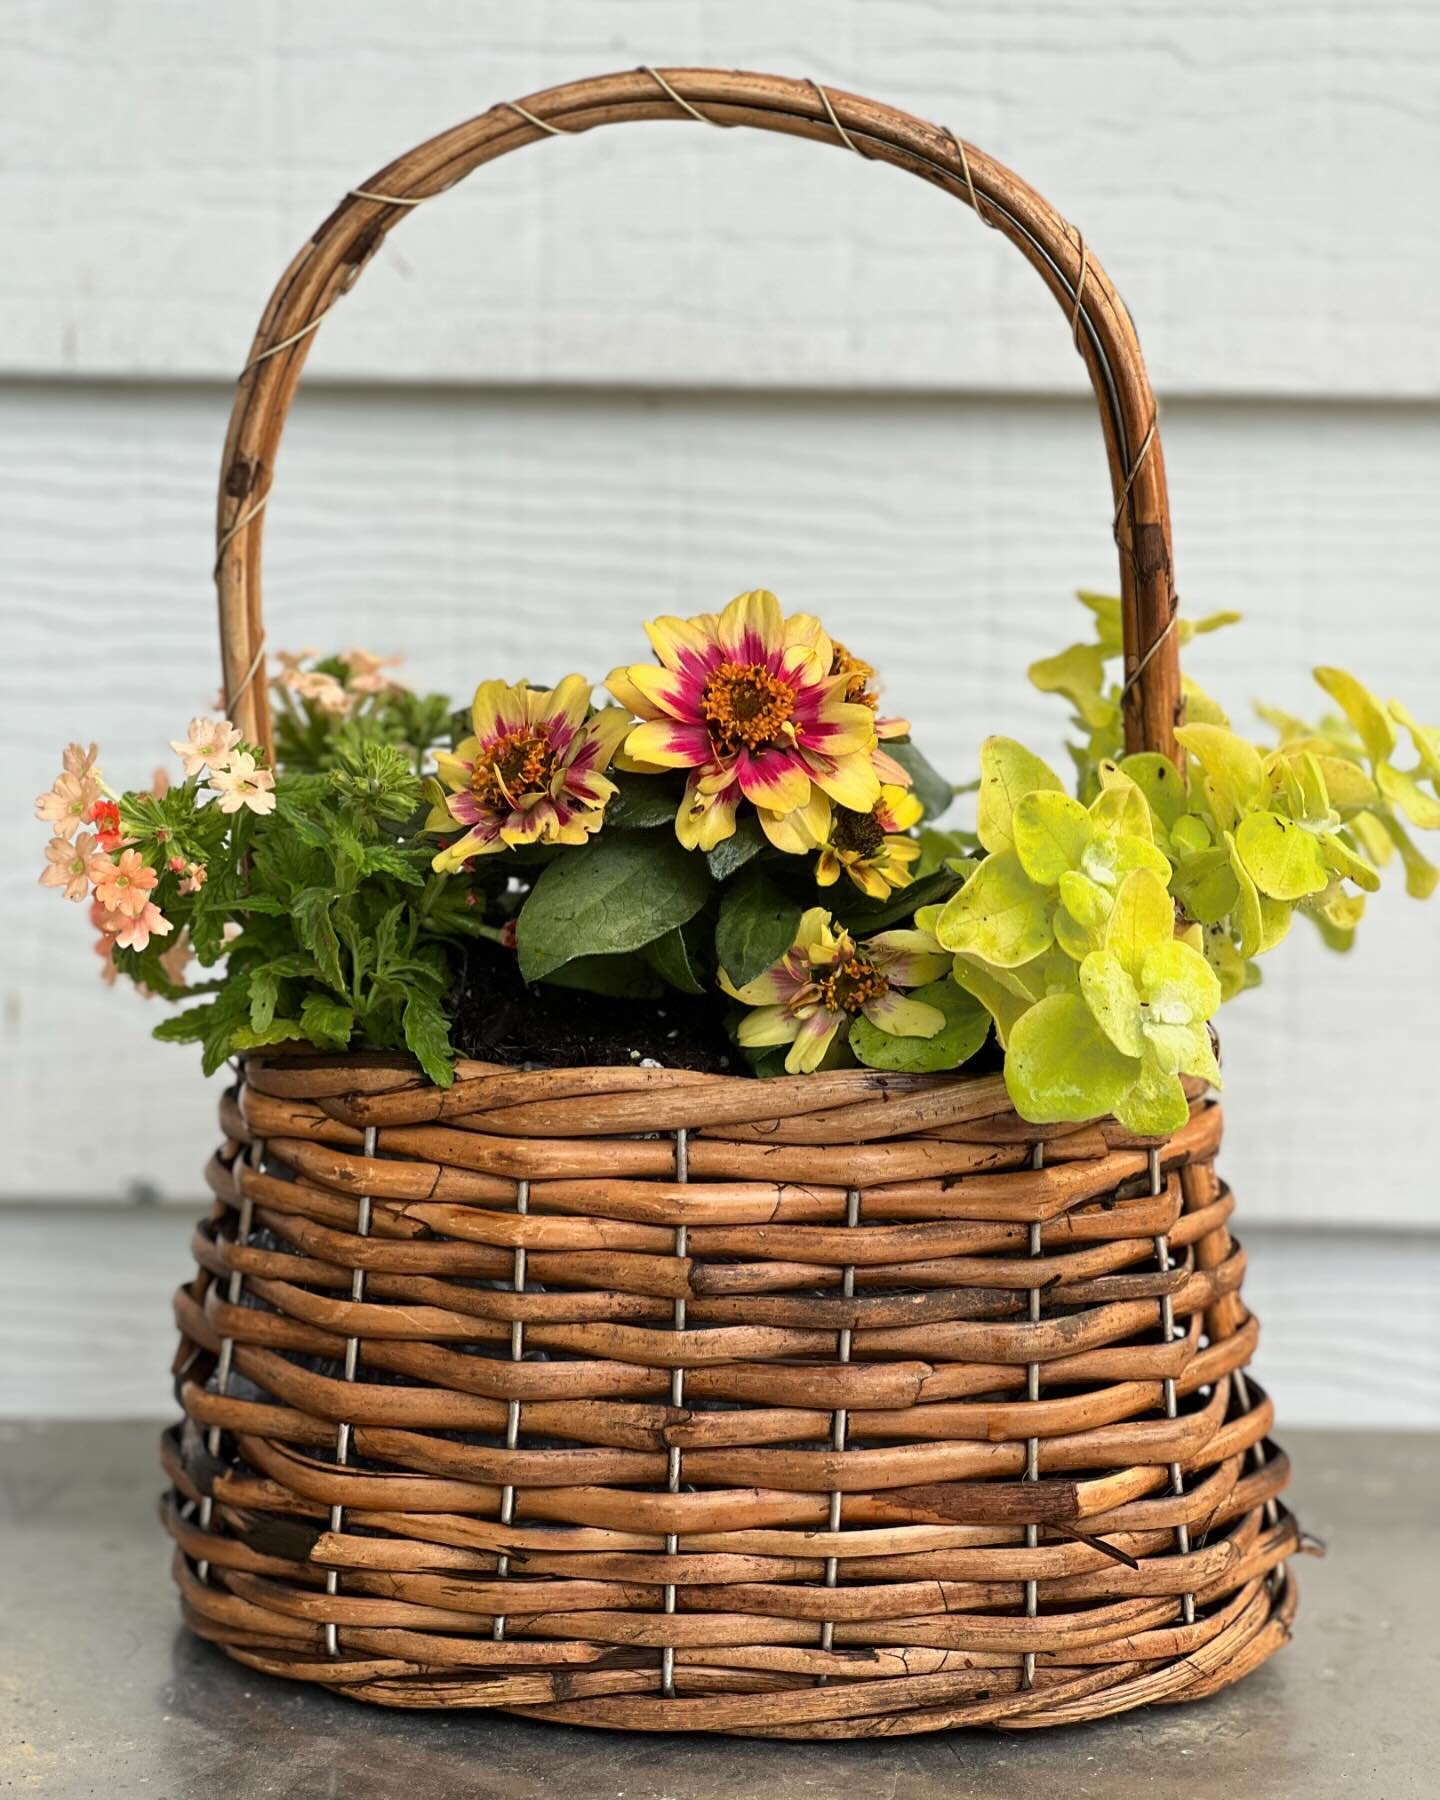 Hi friends! I&rsquo;m offering a limited number of Mother&rsquo;s Day flower baskets filled with annual flowers, vines and foliage. We have two sizes available. Pick up in East Hyde Park anytime Thursday May 8-Saturday May 10th. These baskets are the